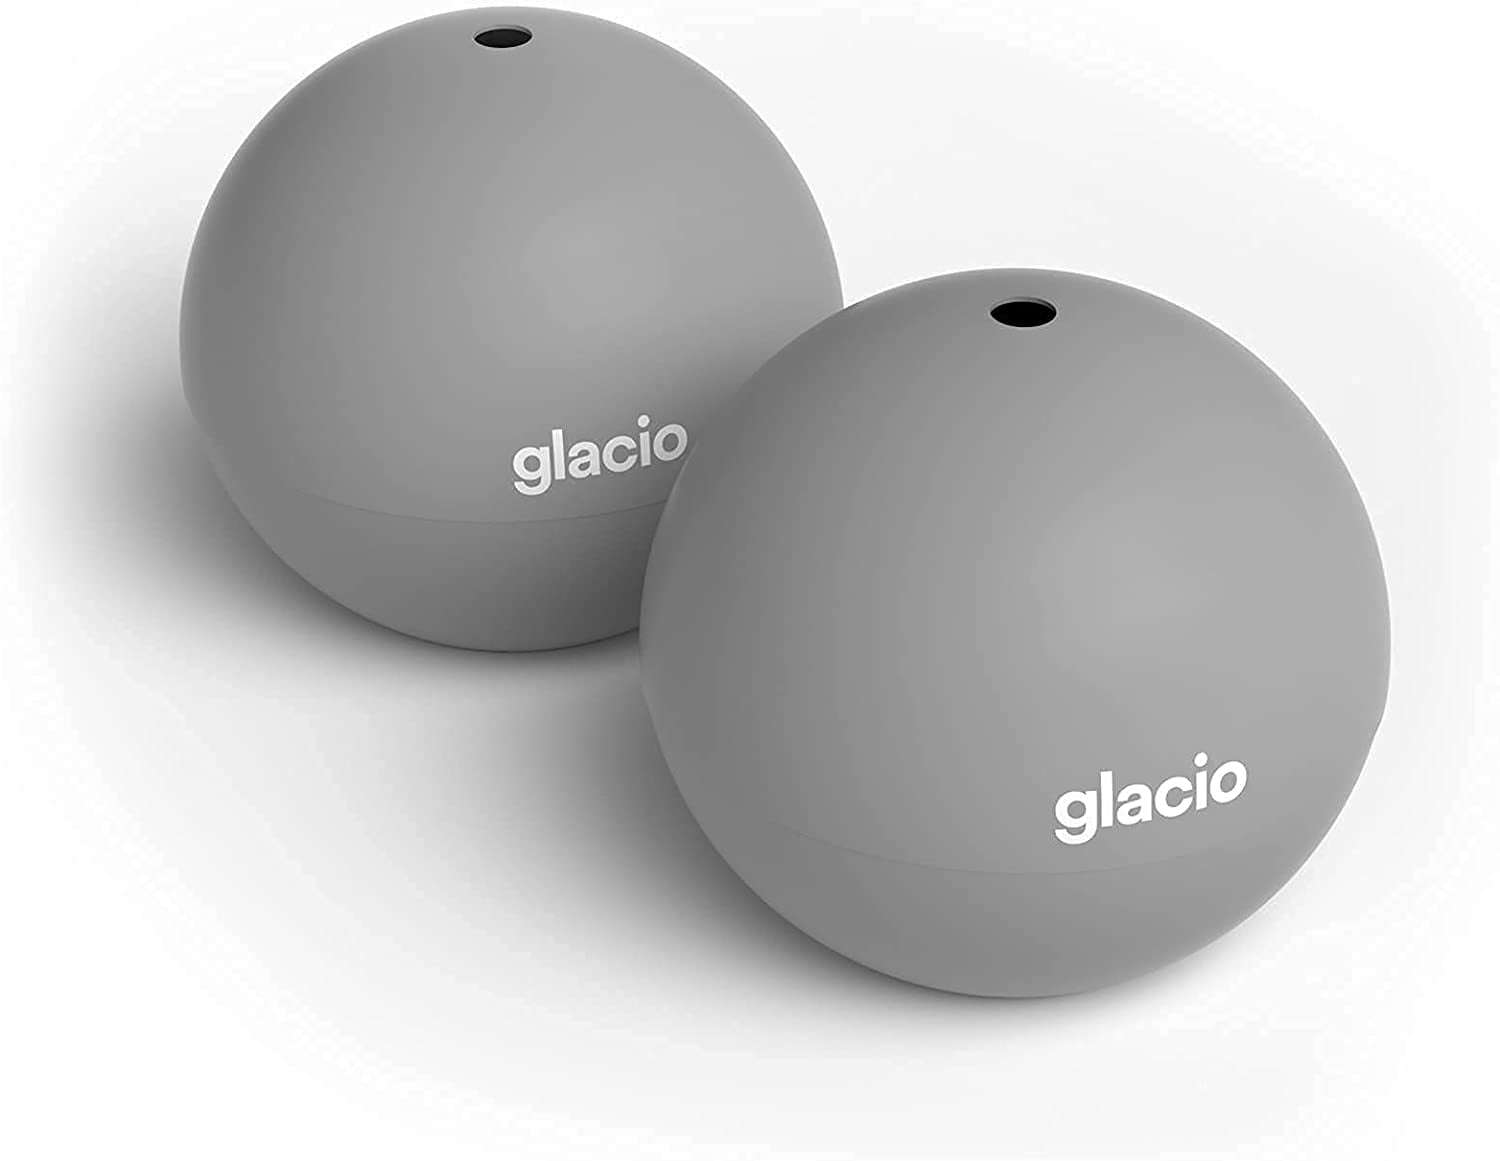 Glacio Sphere Ice Molds - Step-up Your Bar! 